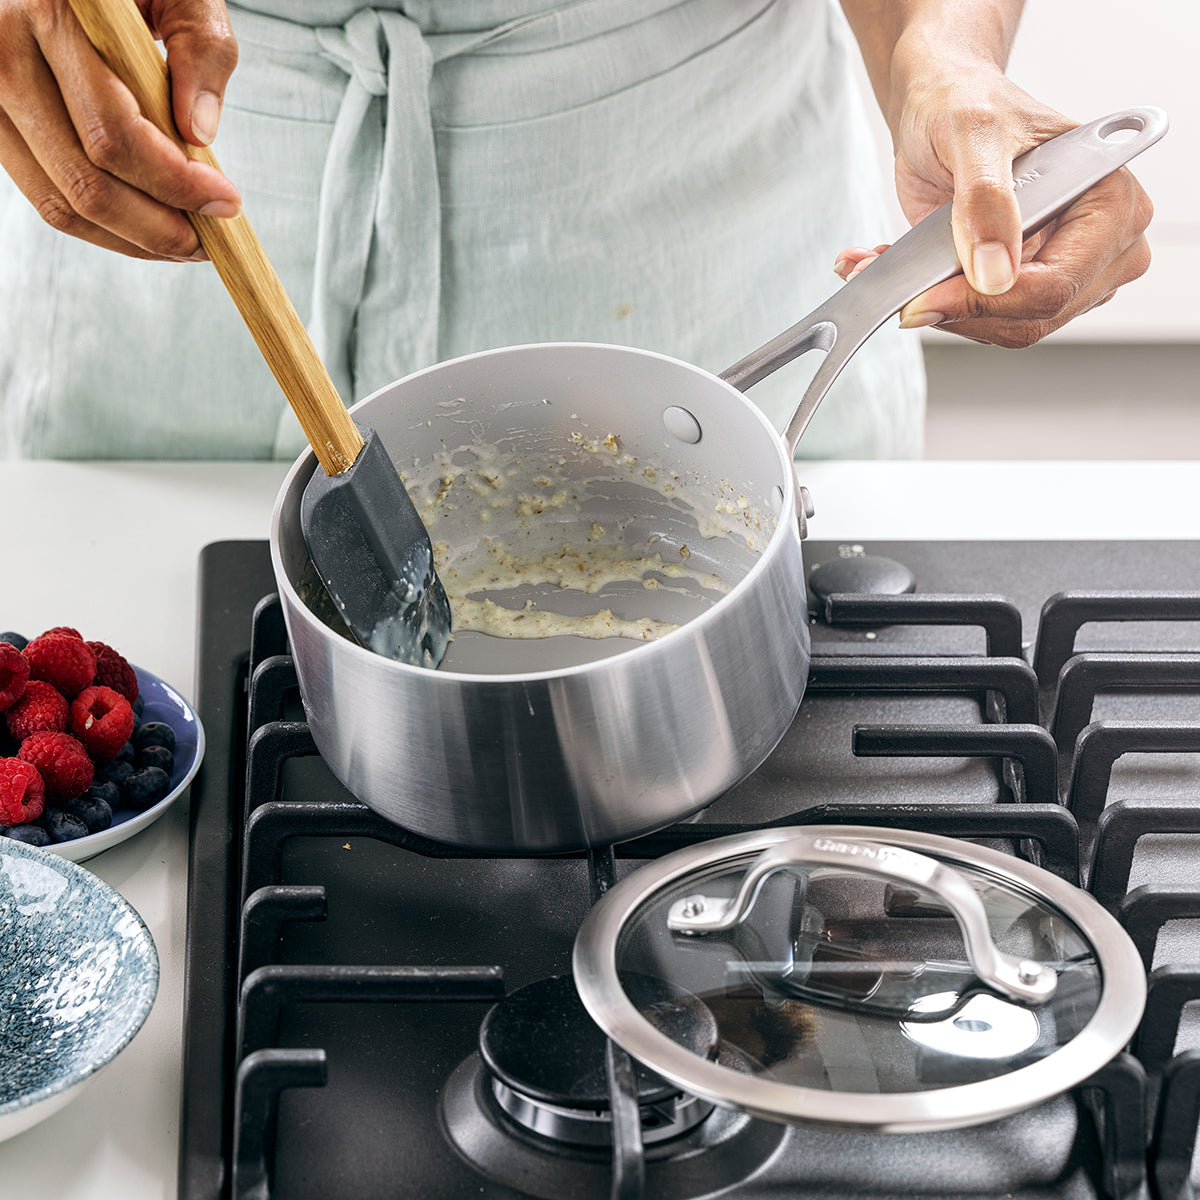 Shop the All-In-One Nonstick Saucepan for All of Your Simmering Needs